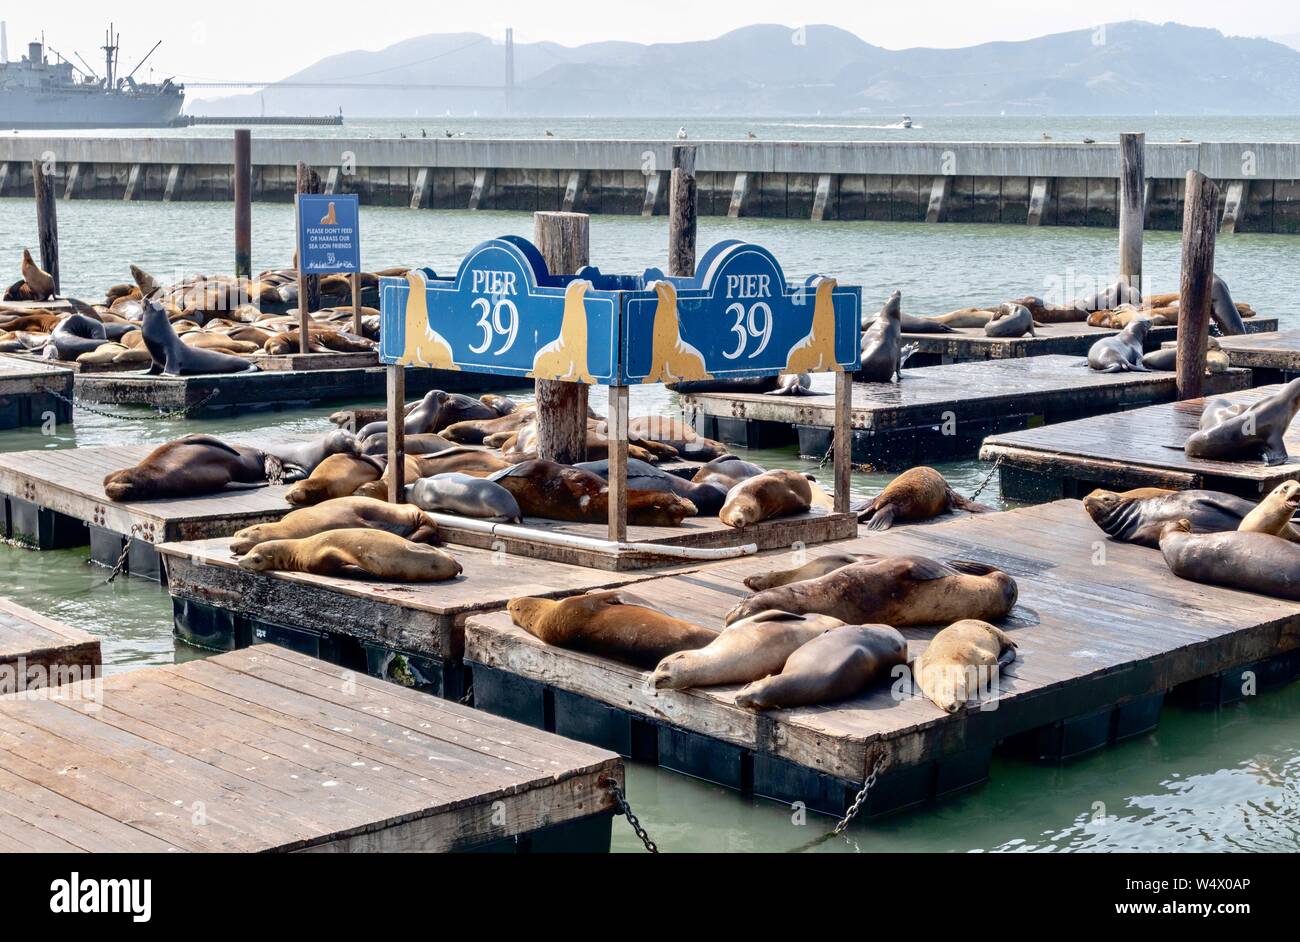 Sea Lions at Pier 39 in San Francisco, Ca Stock Photo